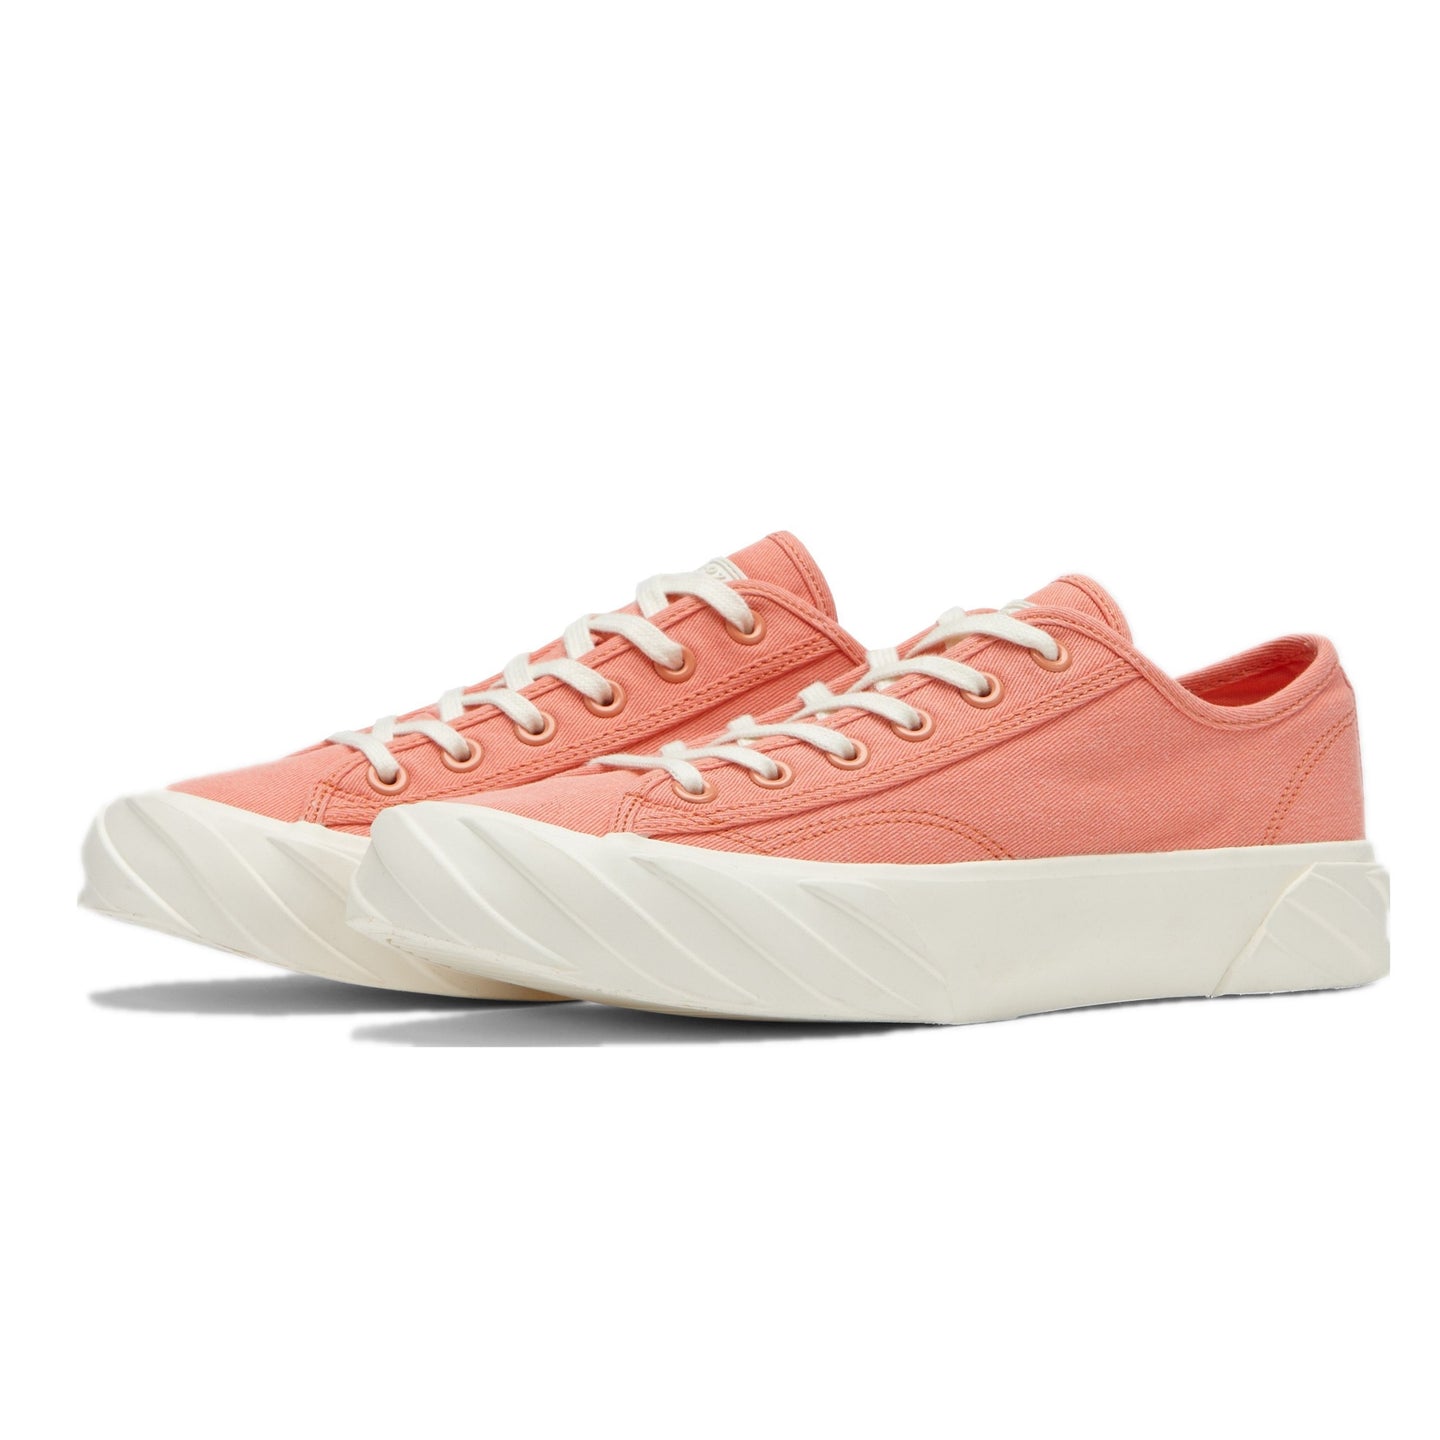 AGE SNEAKERS Low Cut Canvas Coral